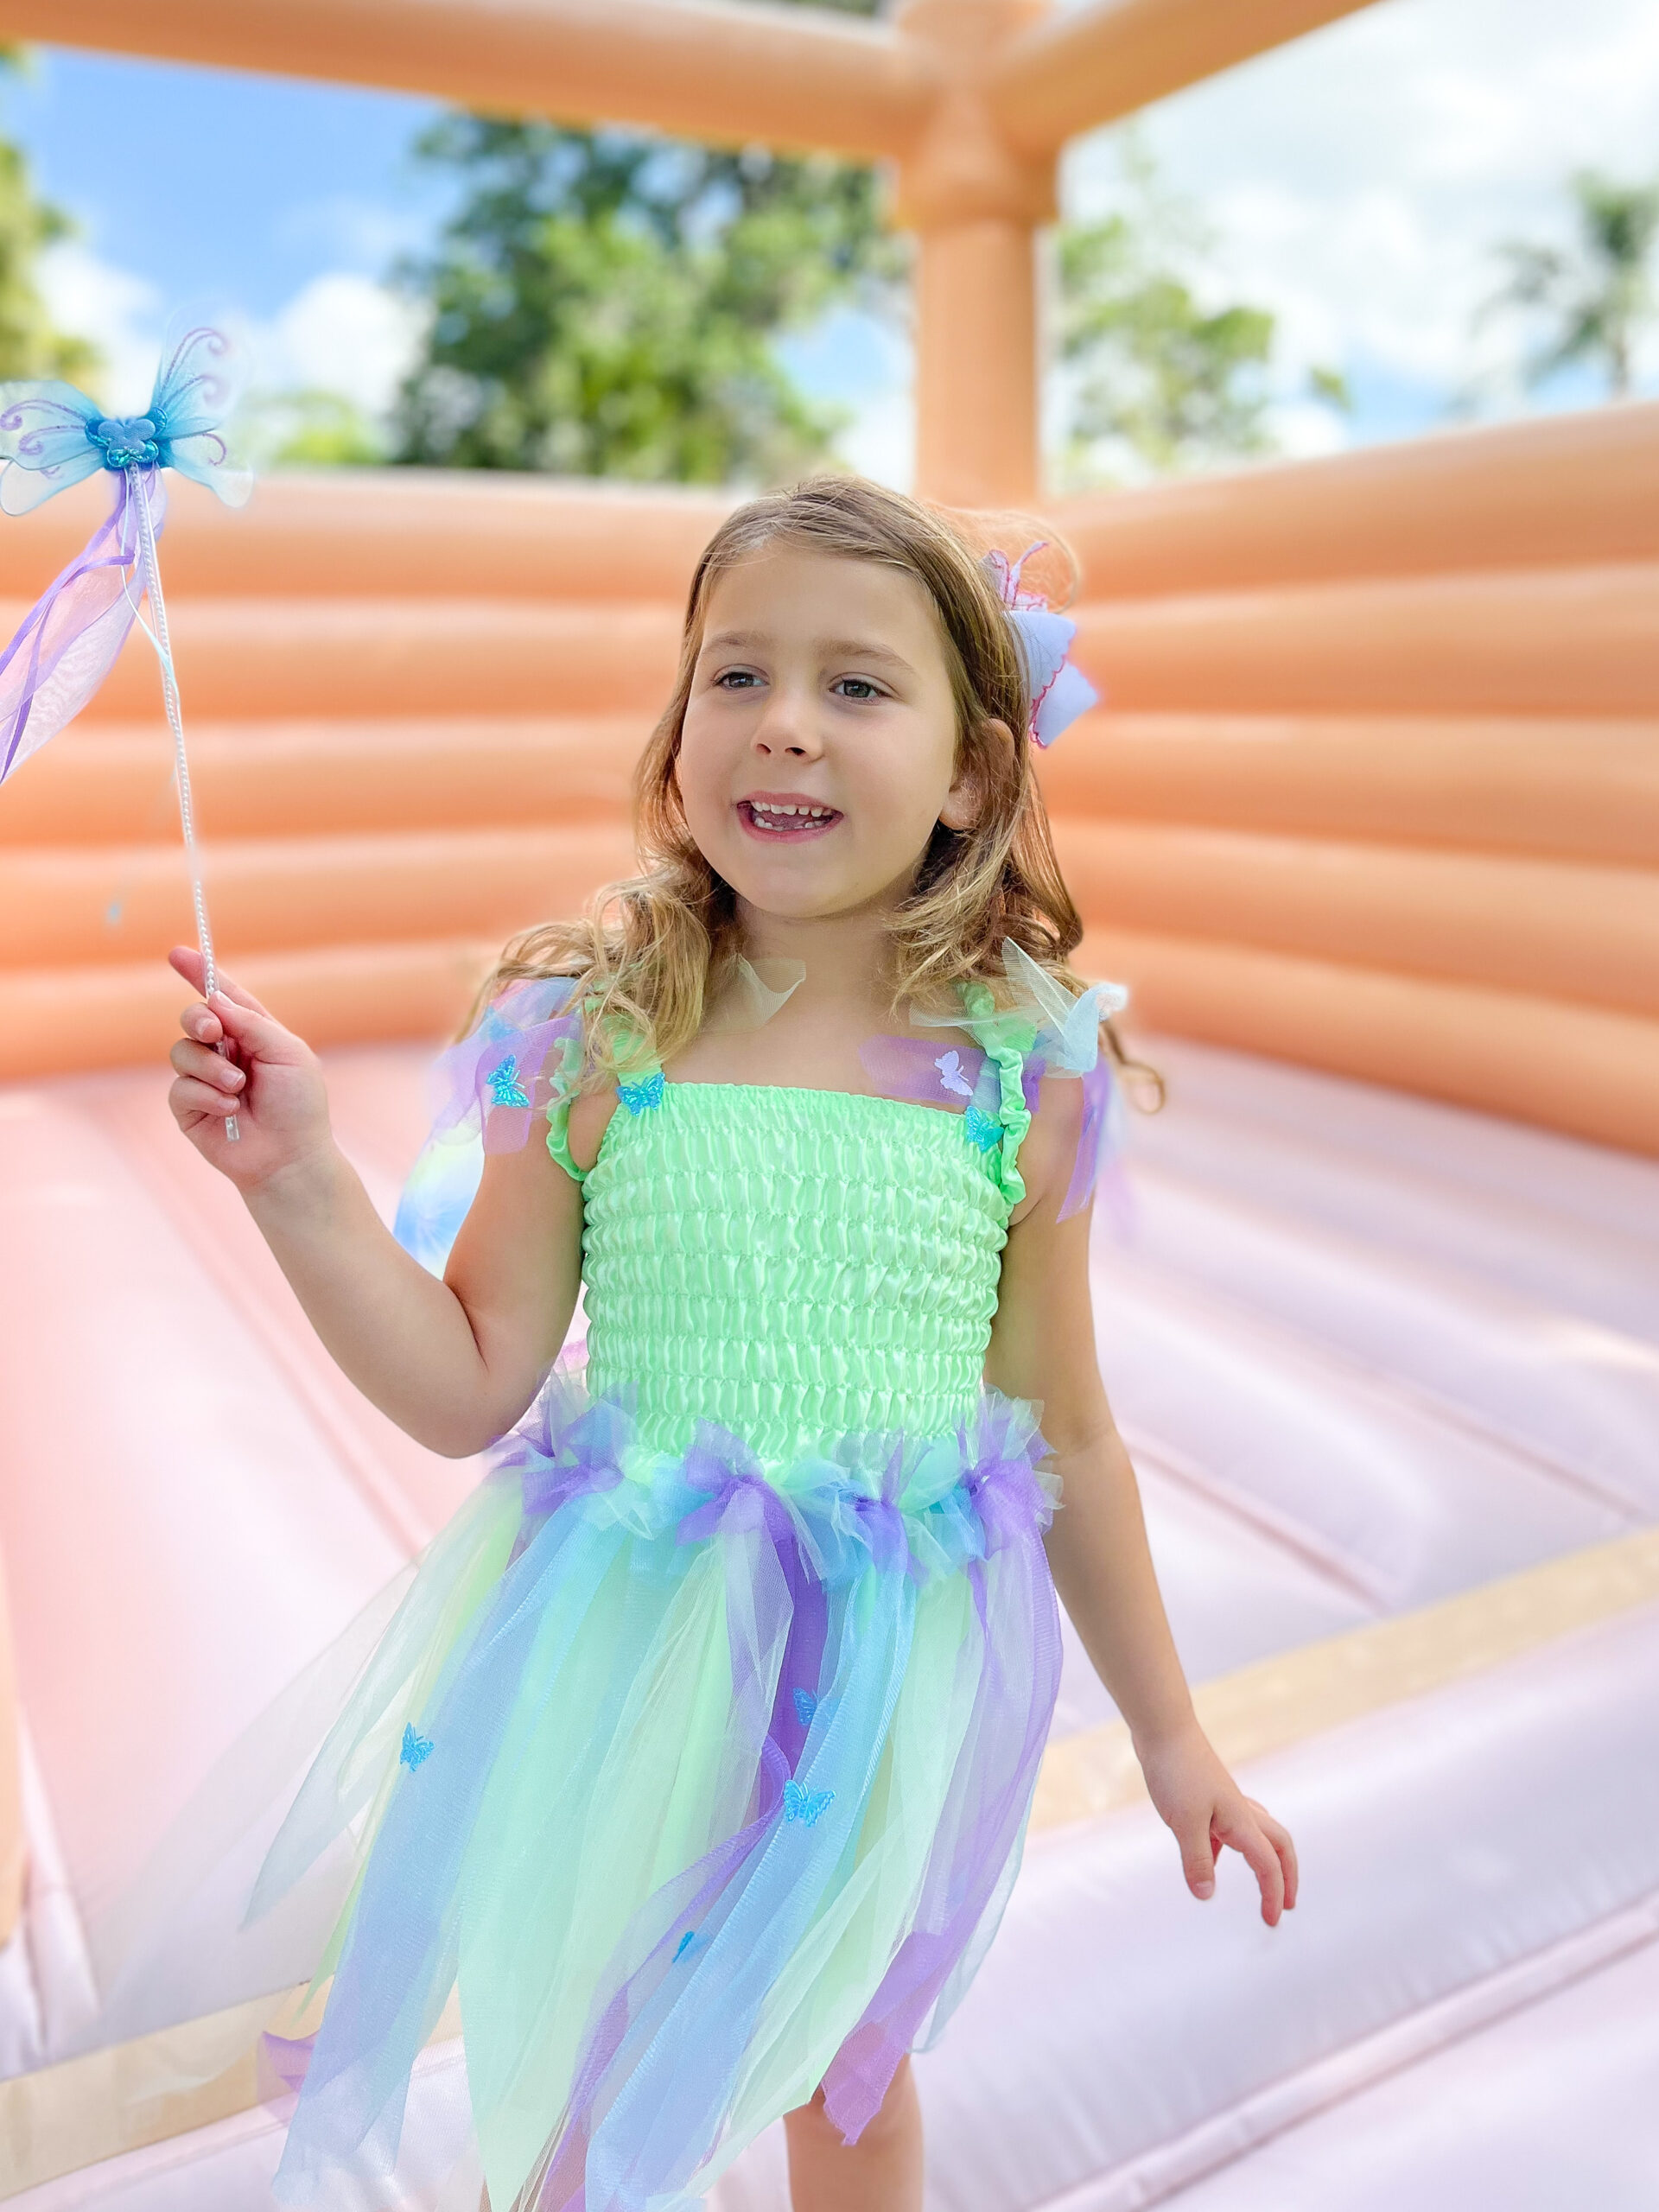 Emma in her fairy costume on the bounce house